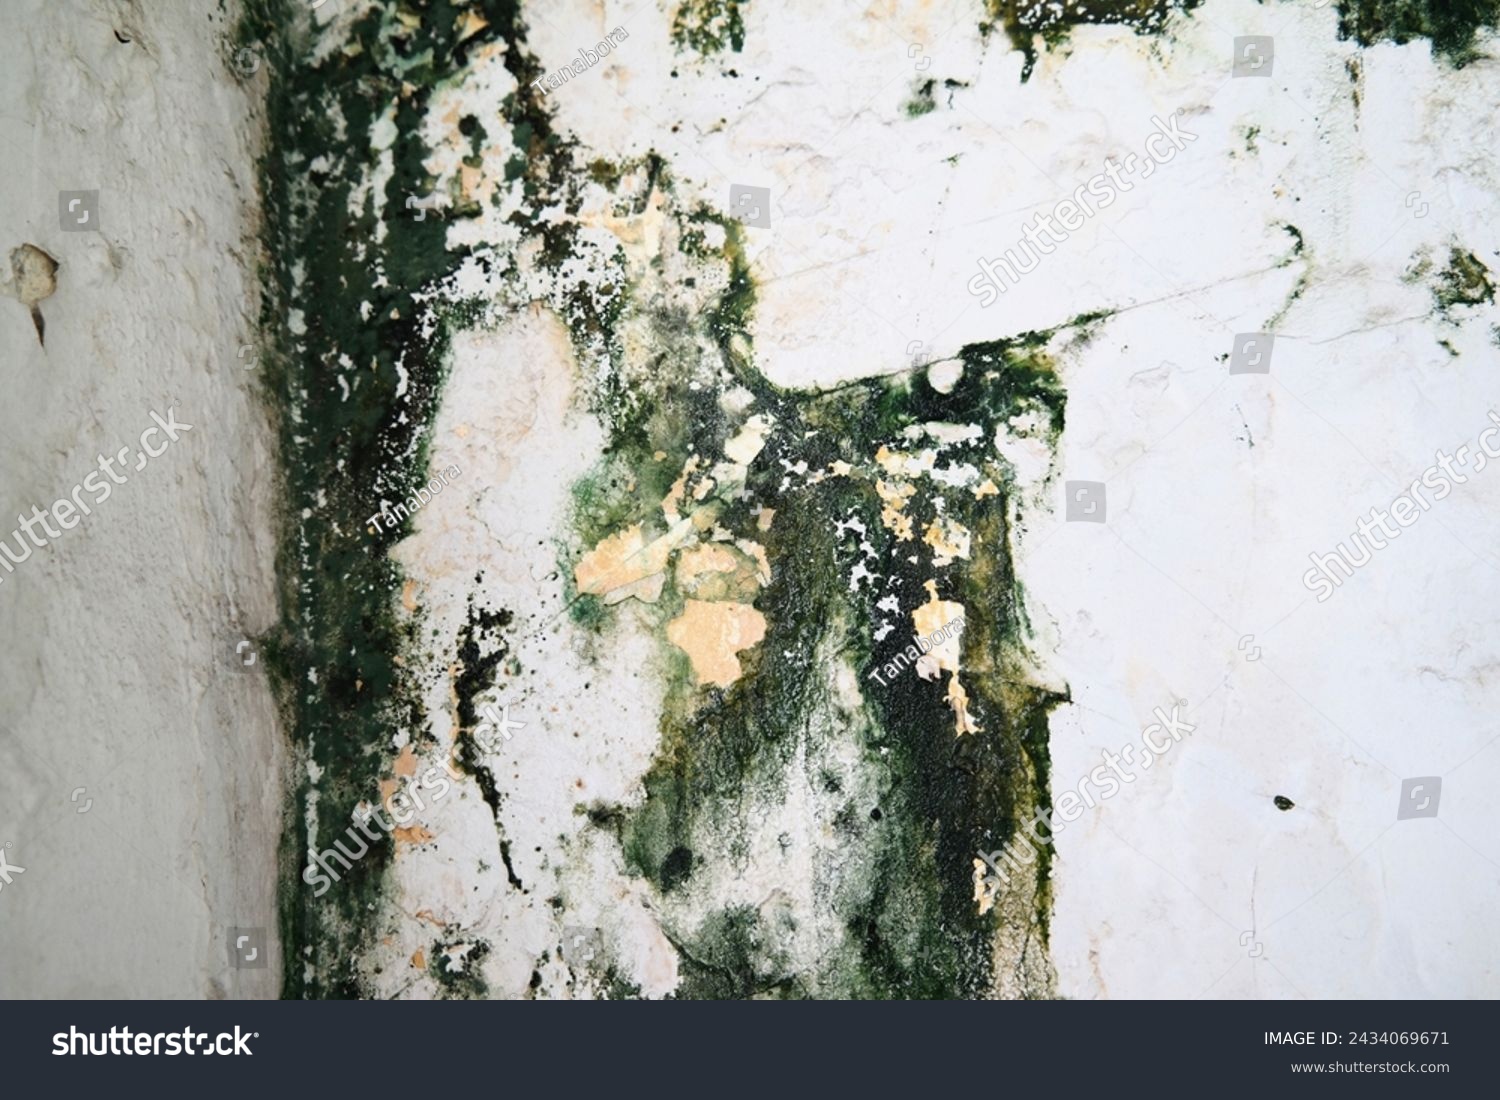 Old and mossy wall background, polished gray concrete grunge textured wall, rough wall texture background, damaged dirty mossy wall surface. In Derelict Old House.  #2434069671